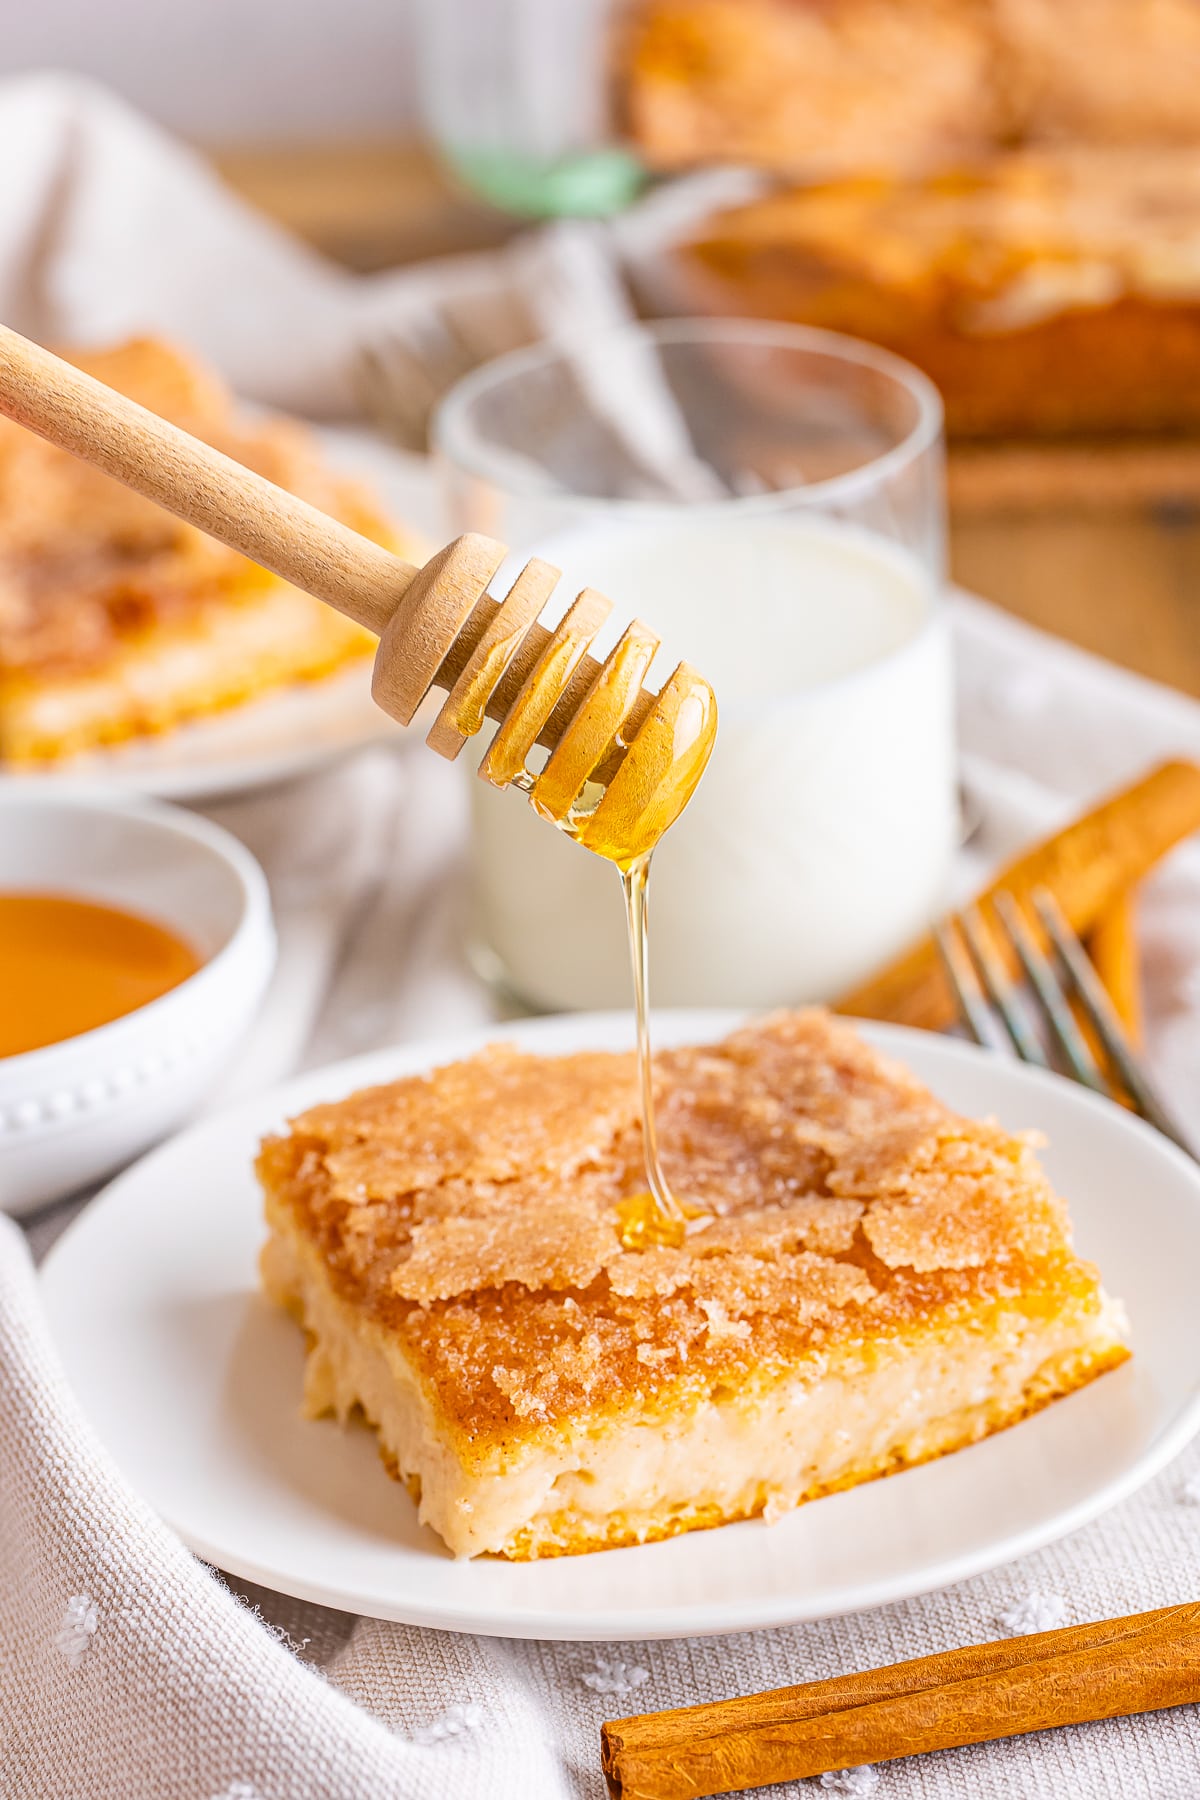 Honey being drizzled on a sopapilla cheesecake bar on a white plate